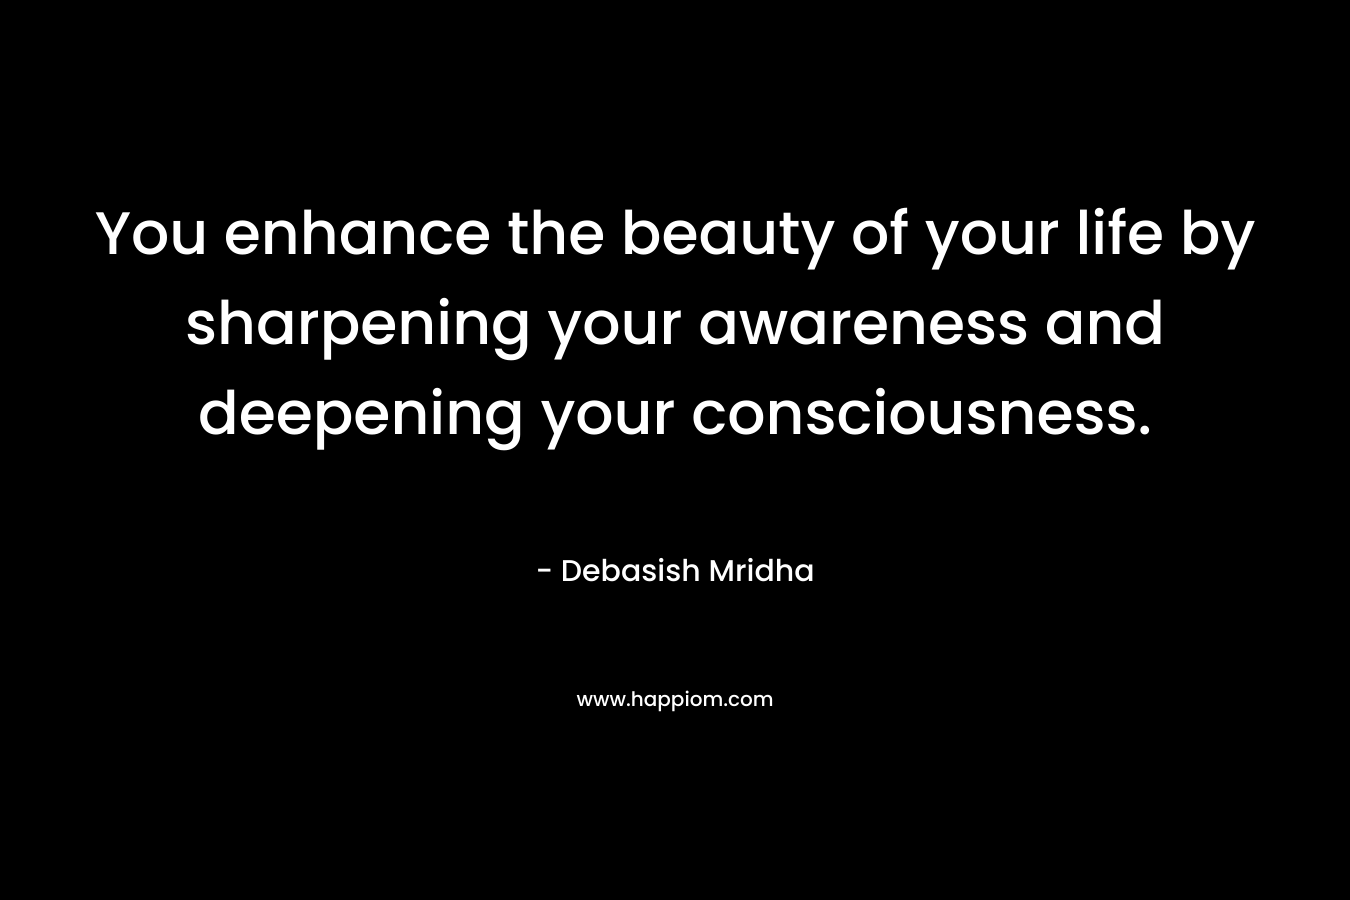 You enhance the beauty of your life by sharpening your awareness and deepening your consciousness. – Debasish Mridha